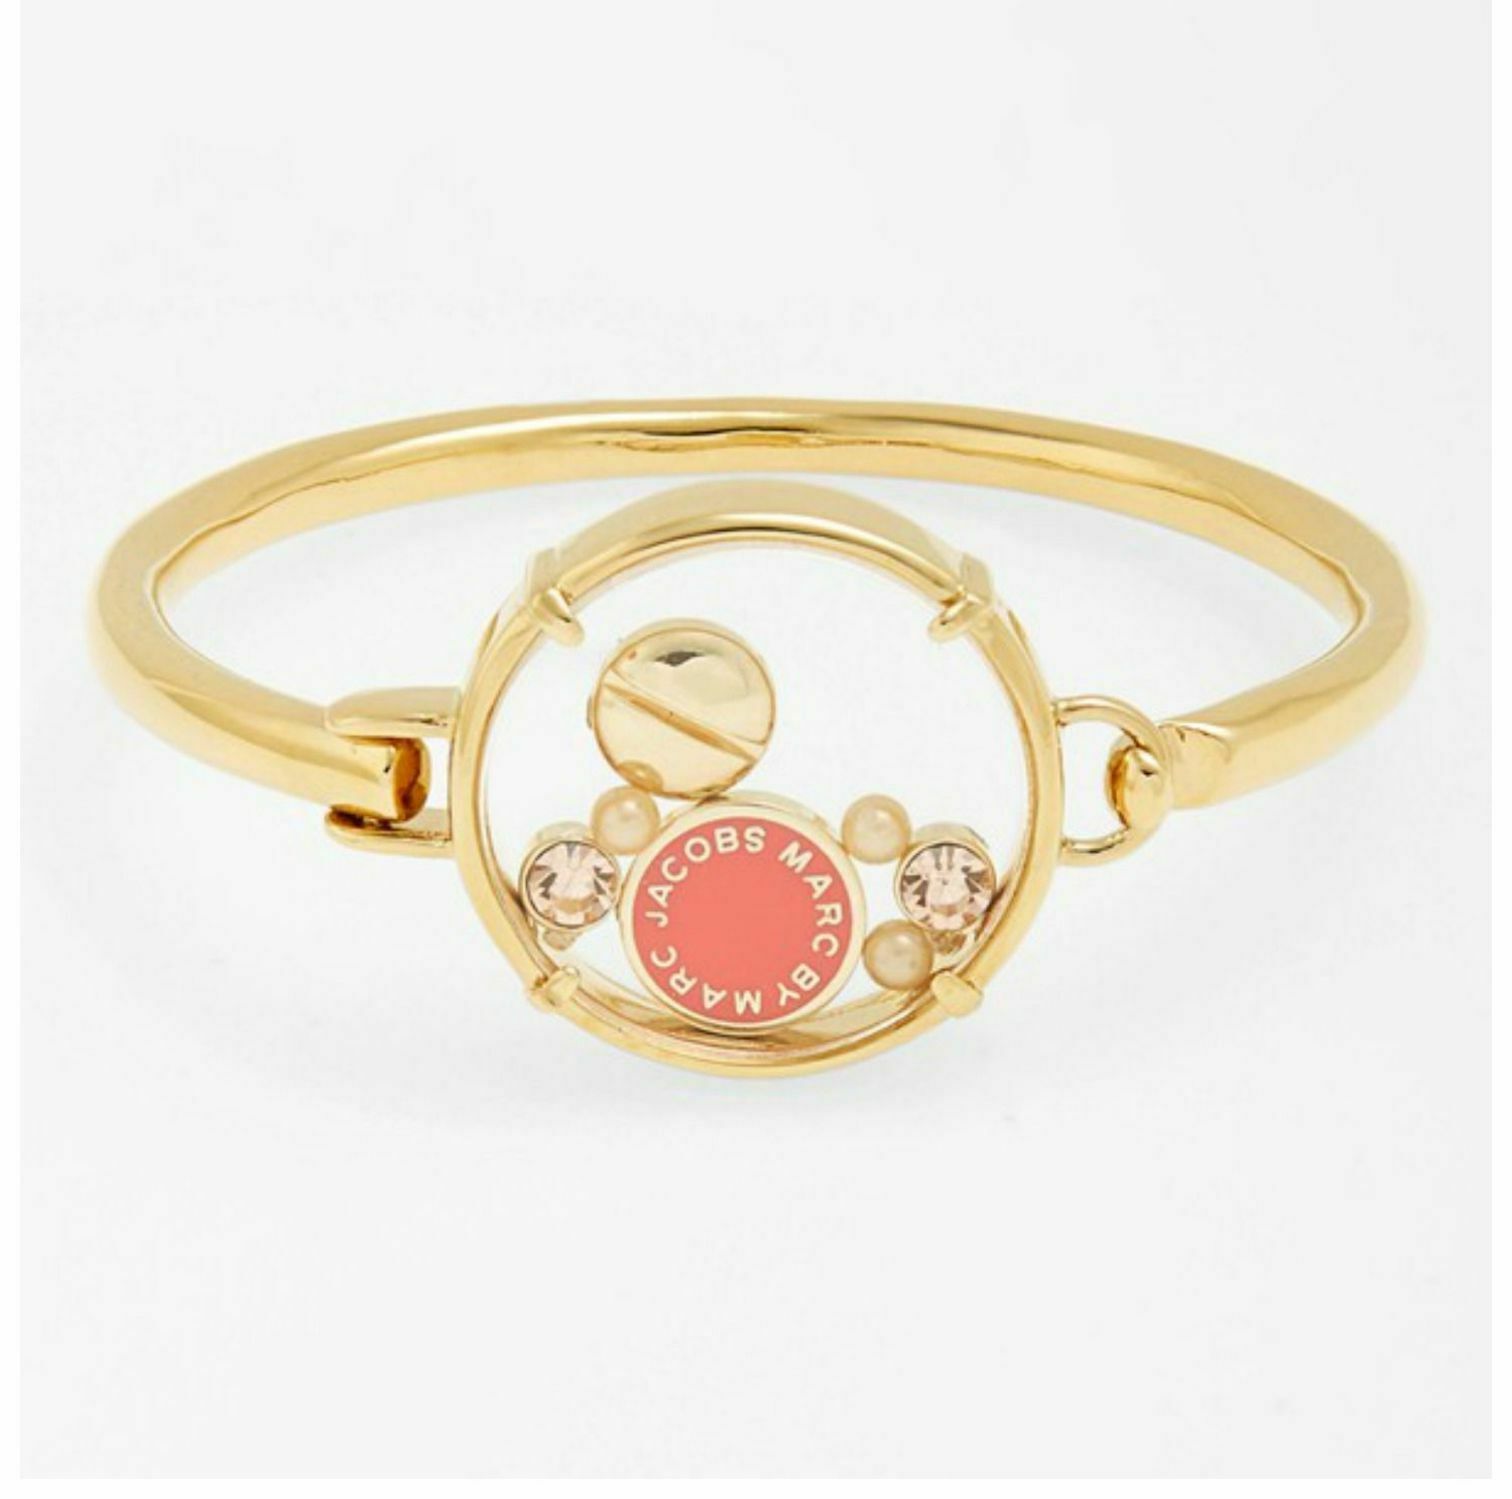 Marc Jacobs Bracelet Floating Charms Hinge Cuff Bangle Gold New $118 - $87.12